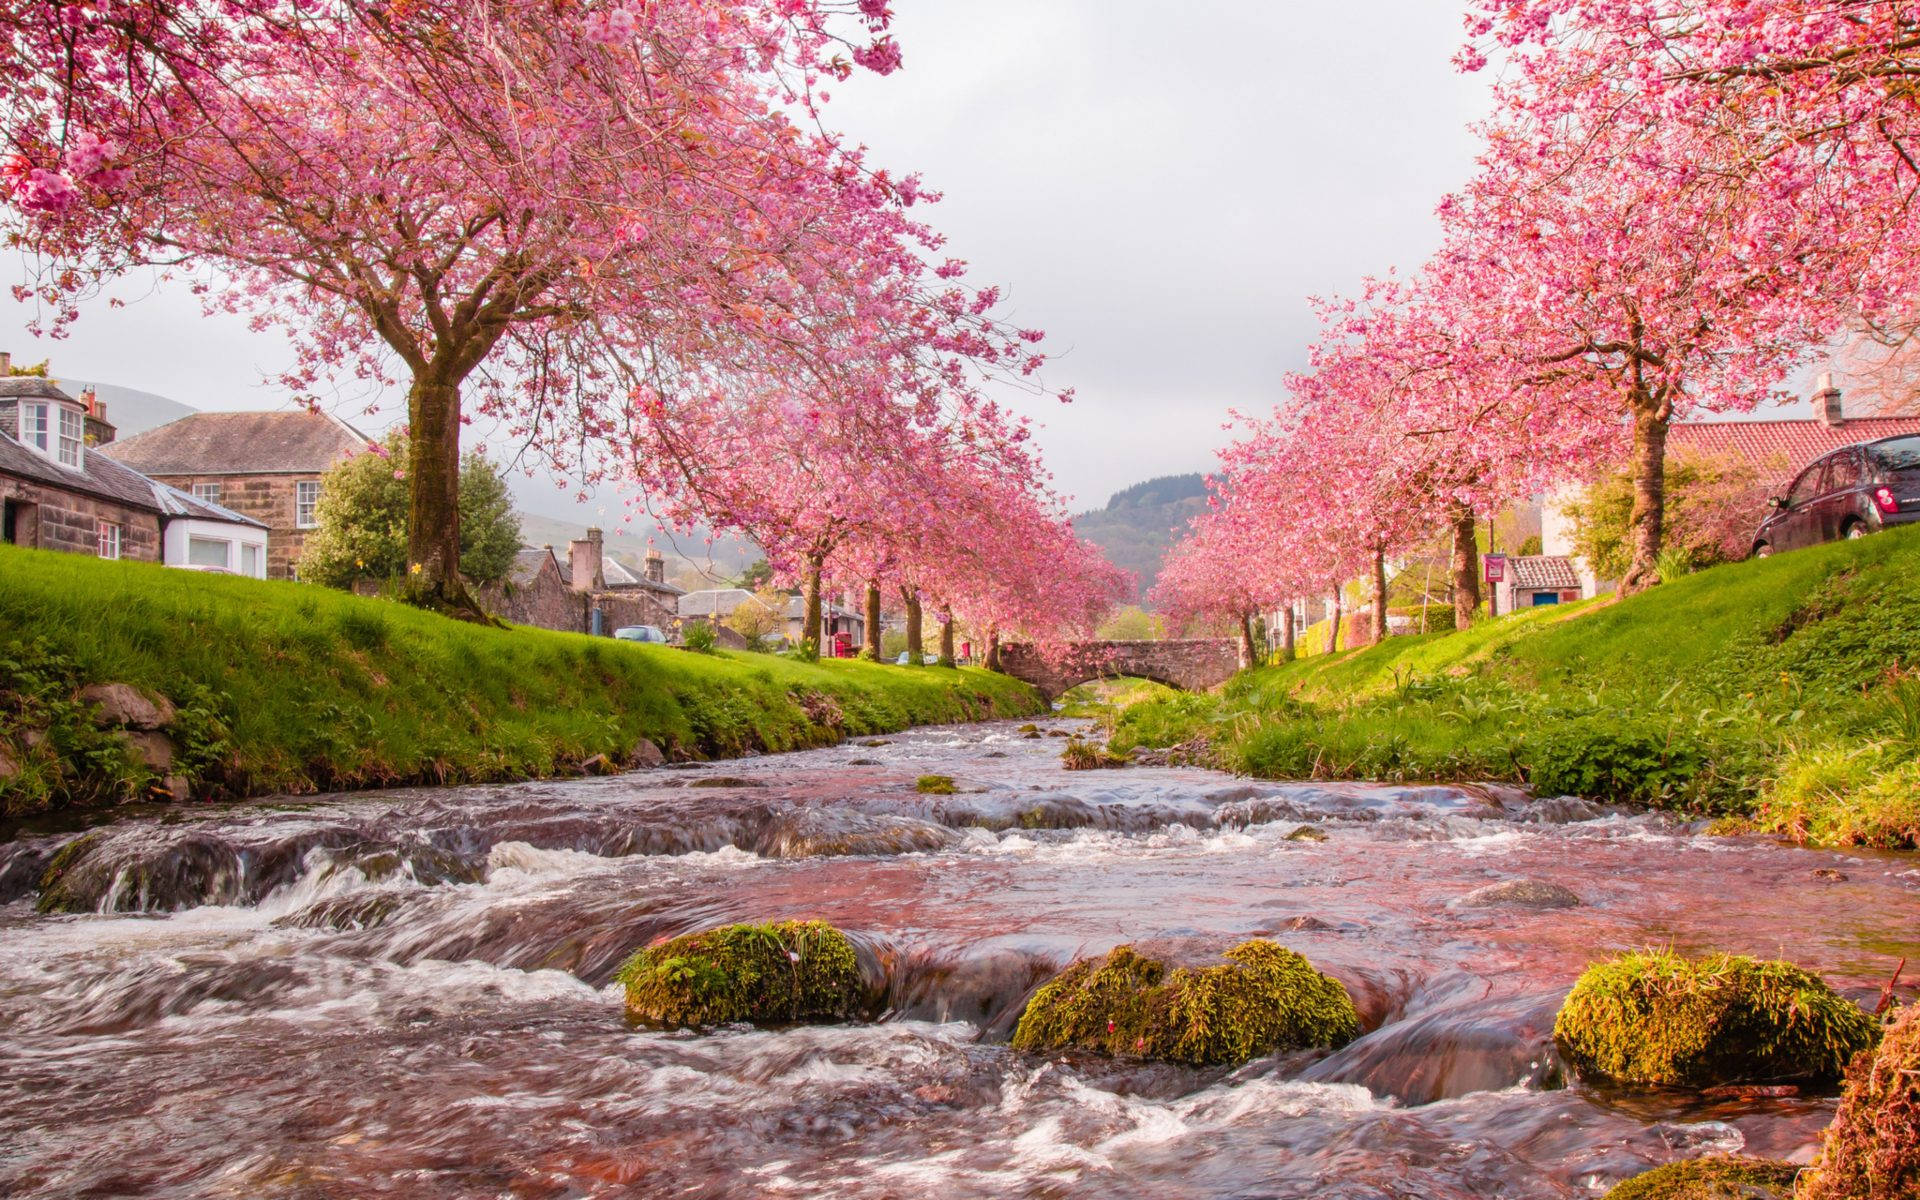 A Breathtaking View Of Japan's Cherry Blossom Wallpaper